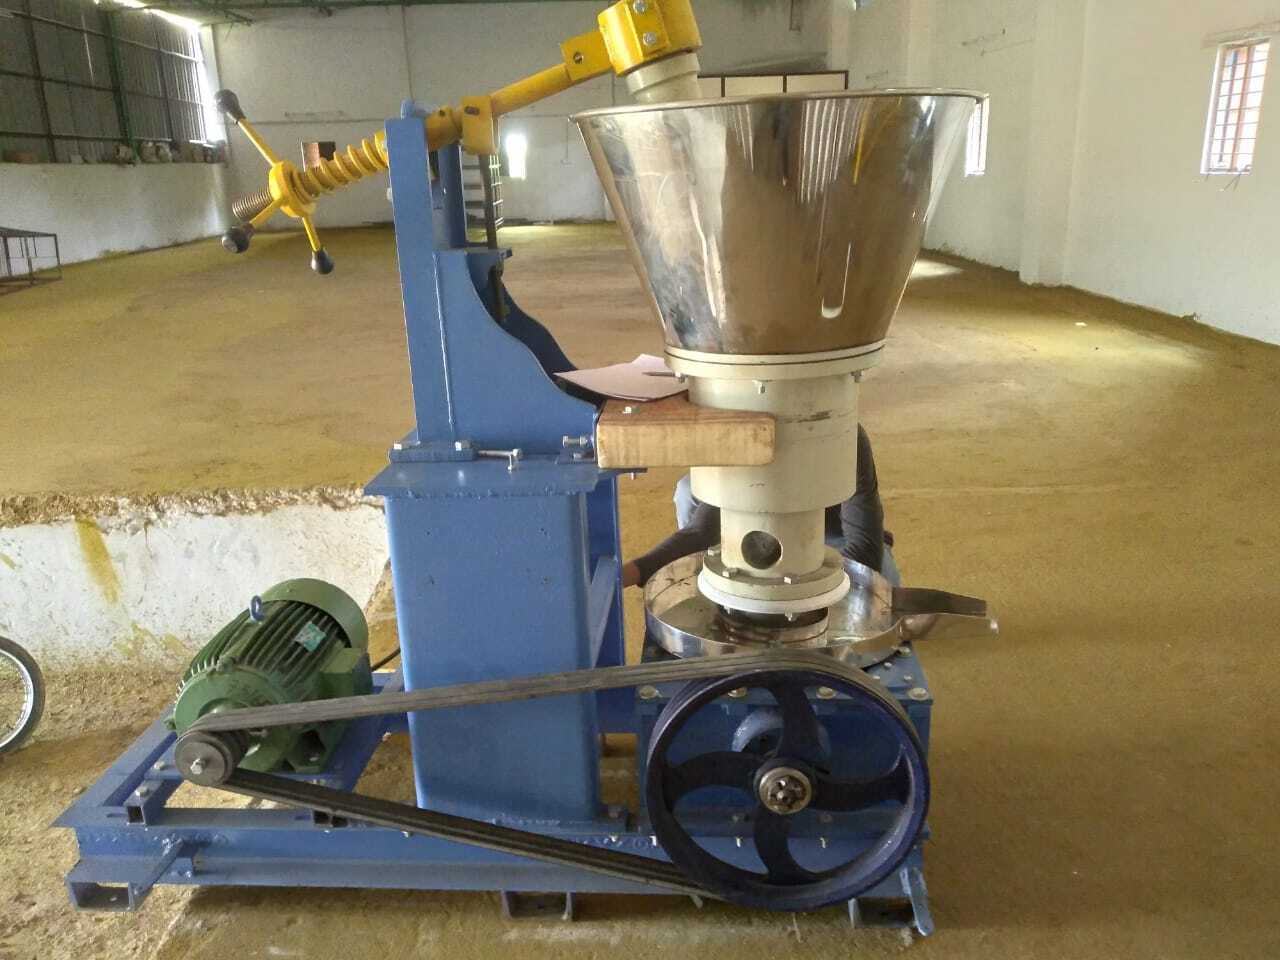 Groundnut Oil Extraction Machine